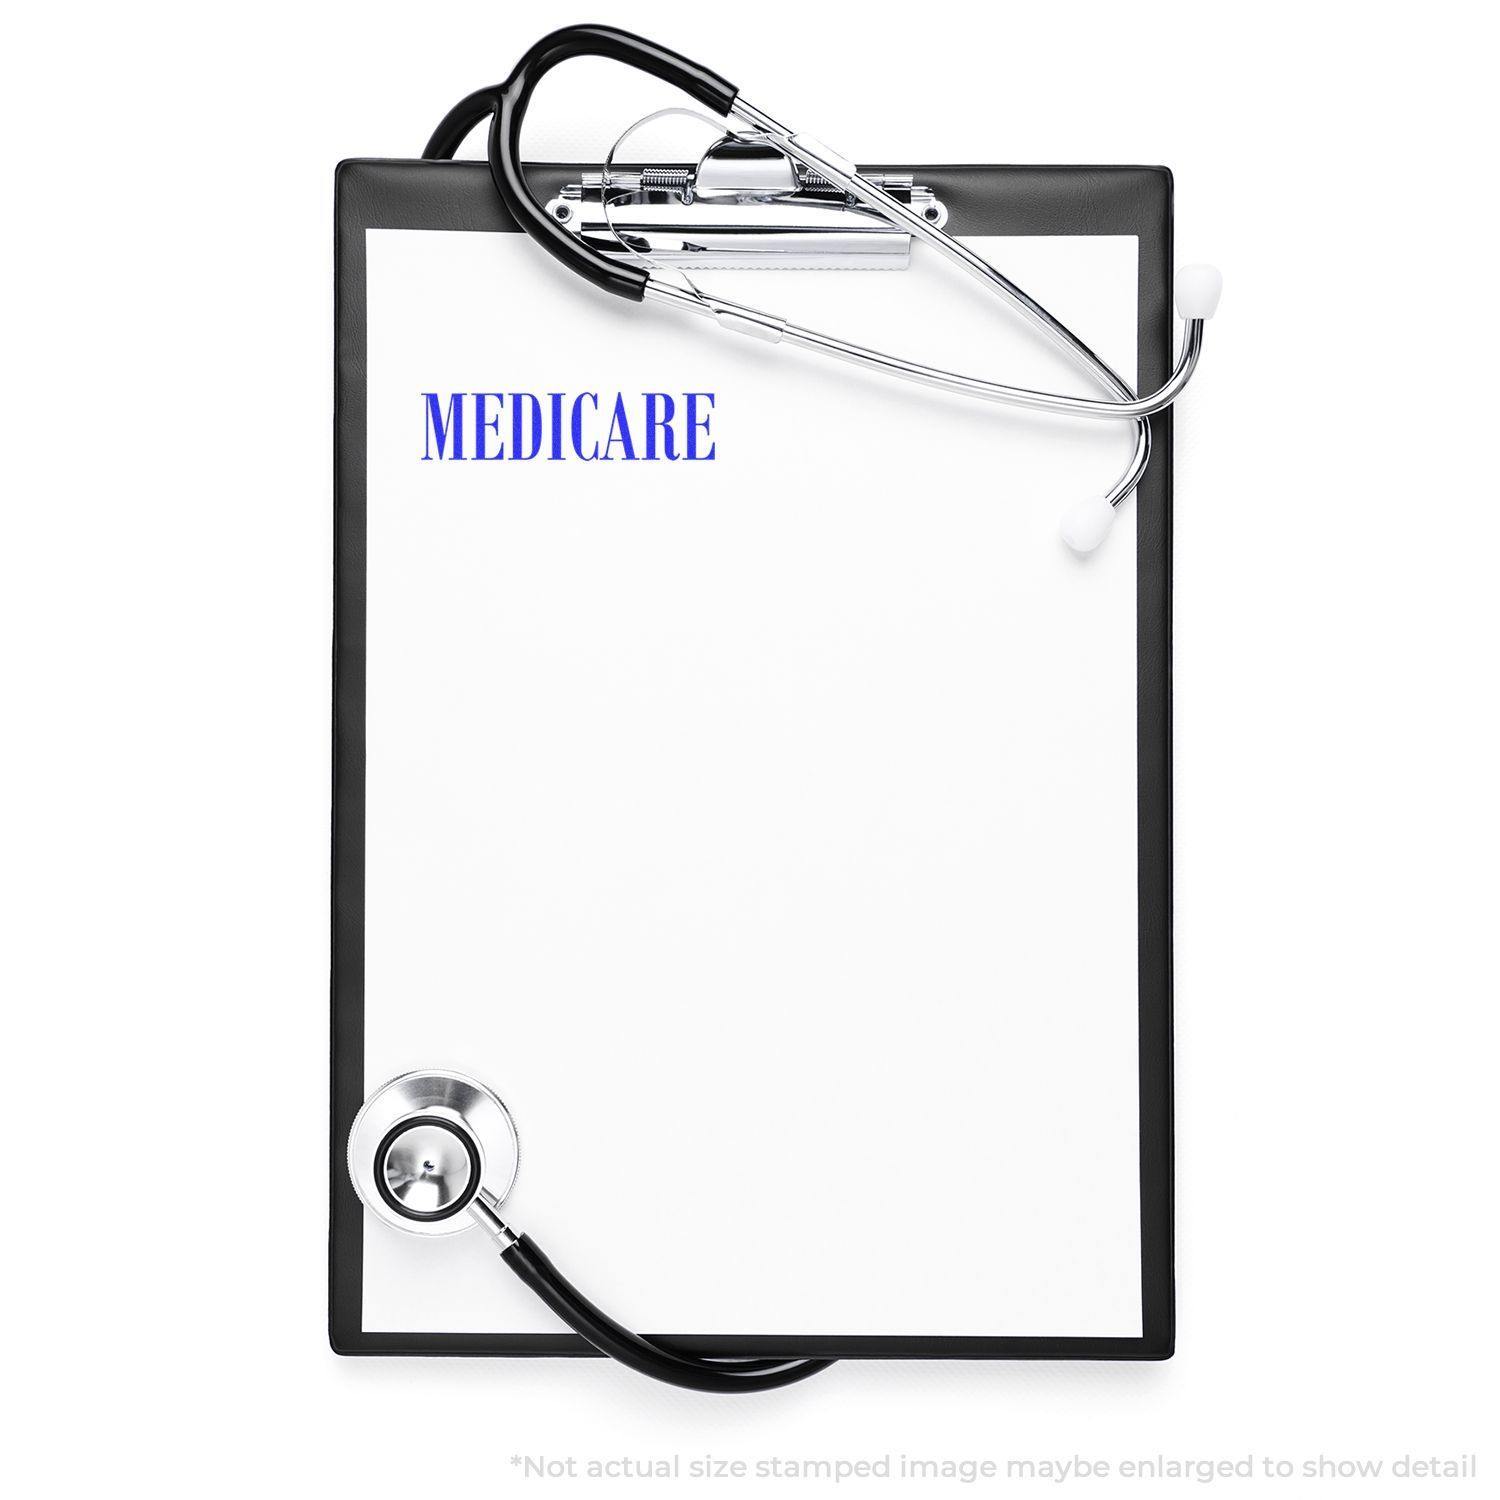 A stock office rubber stamp with a stamped image showing how the text "MEDICARE" in a large font is displayed after stamping.